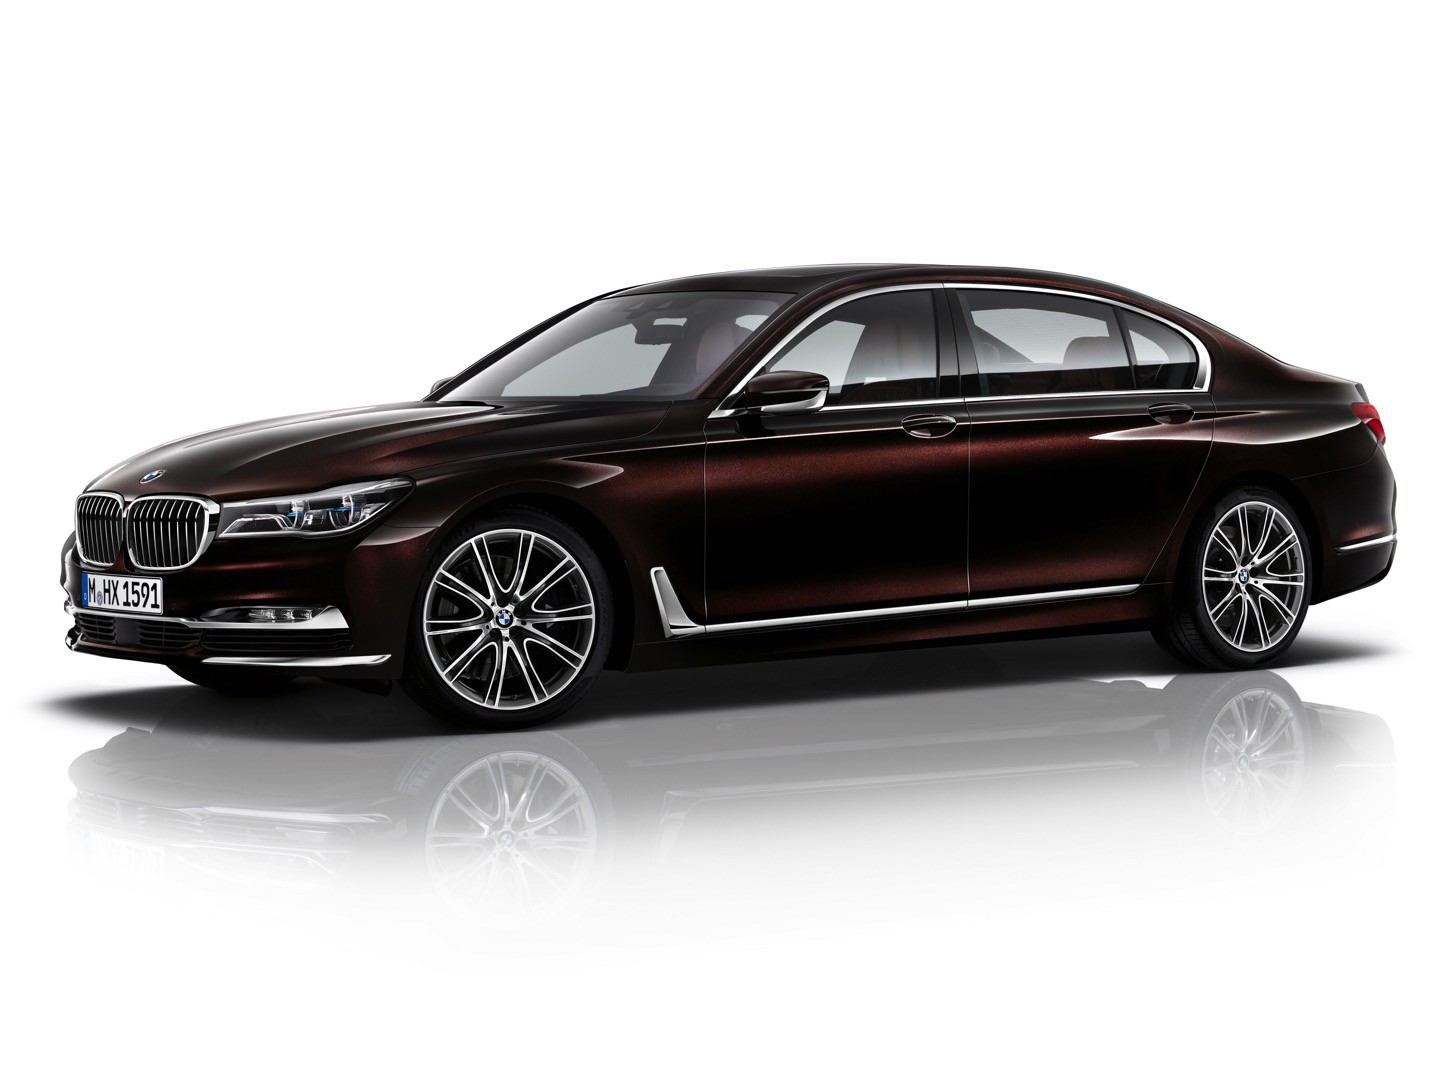 2016-bmw-7-series-finally-officially-unveiled-the-good-stuffs-inside-photo-gallery_130